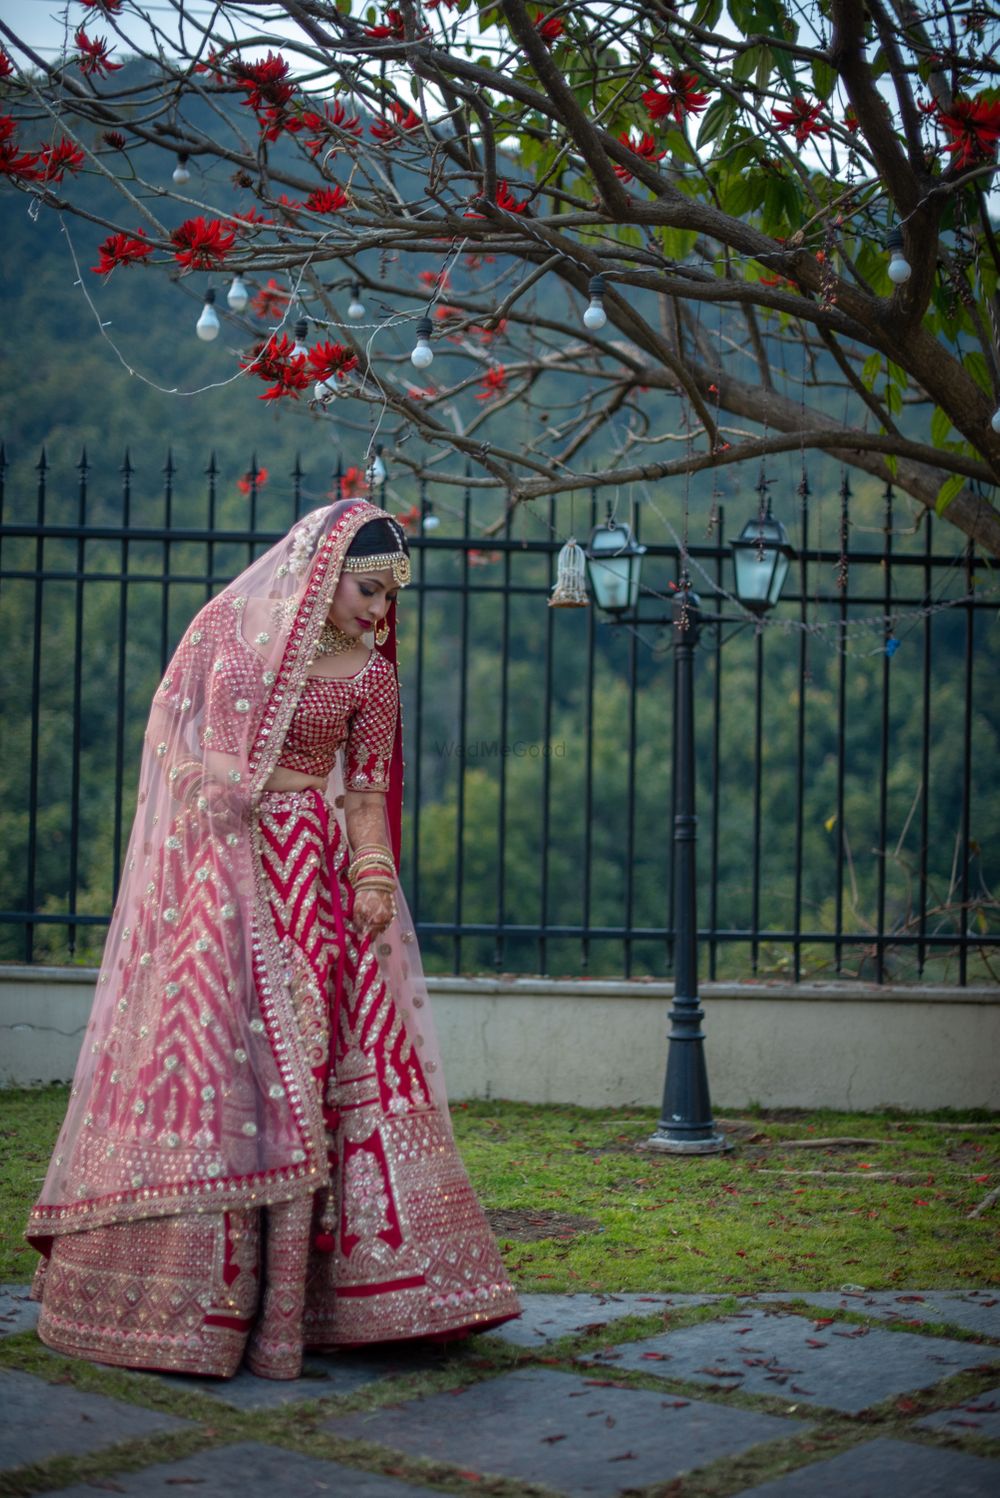 Photo of Bride in red and white lehenga with single dupatta drape